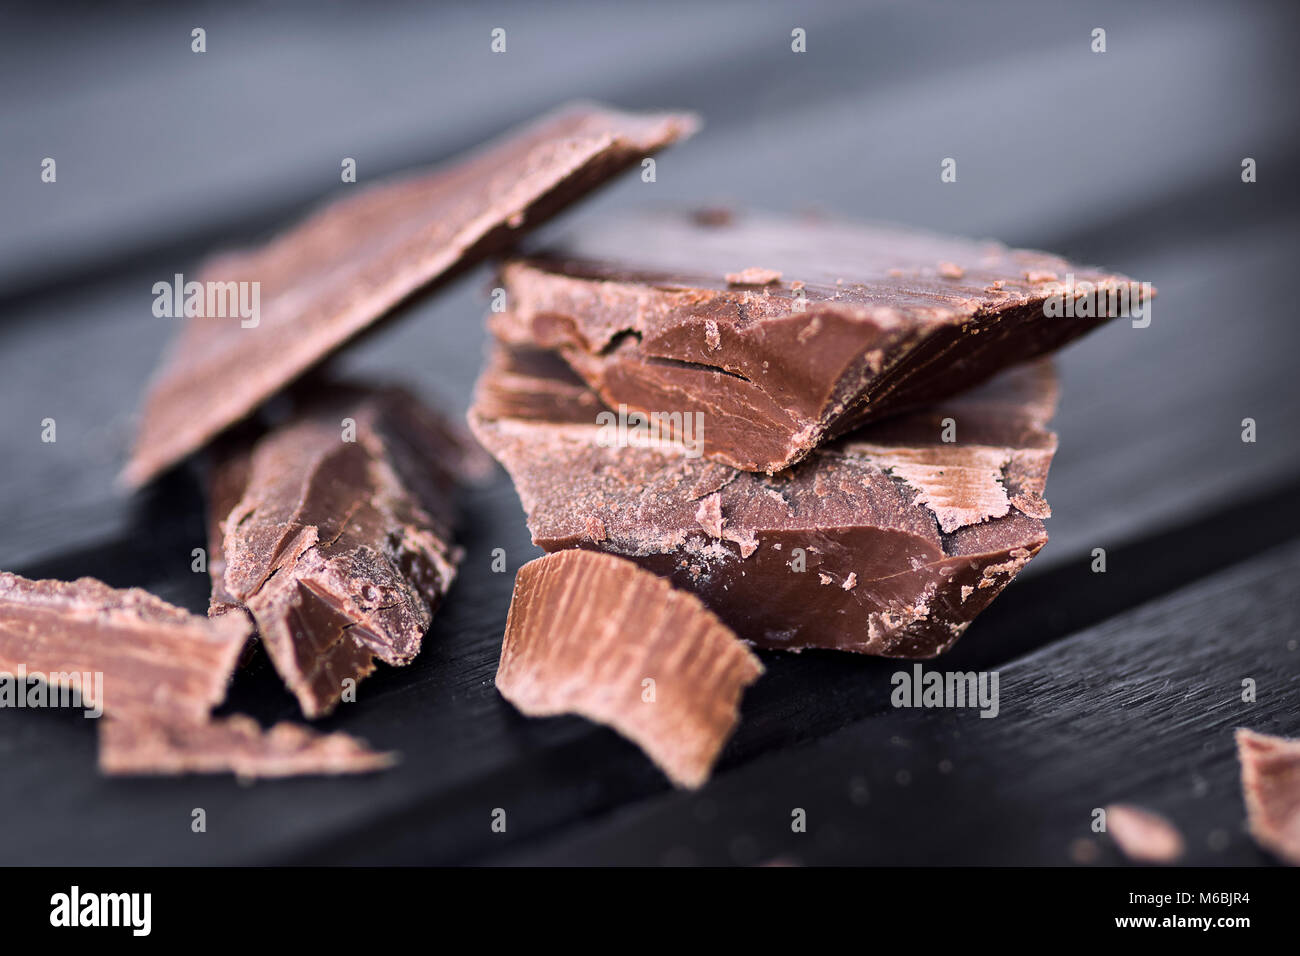 Delicious Chocolate pieces on a dark wooden moody background, closeup macro, with lots of texture Stock Photo